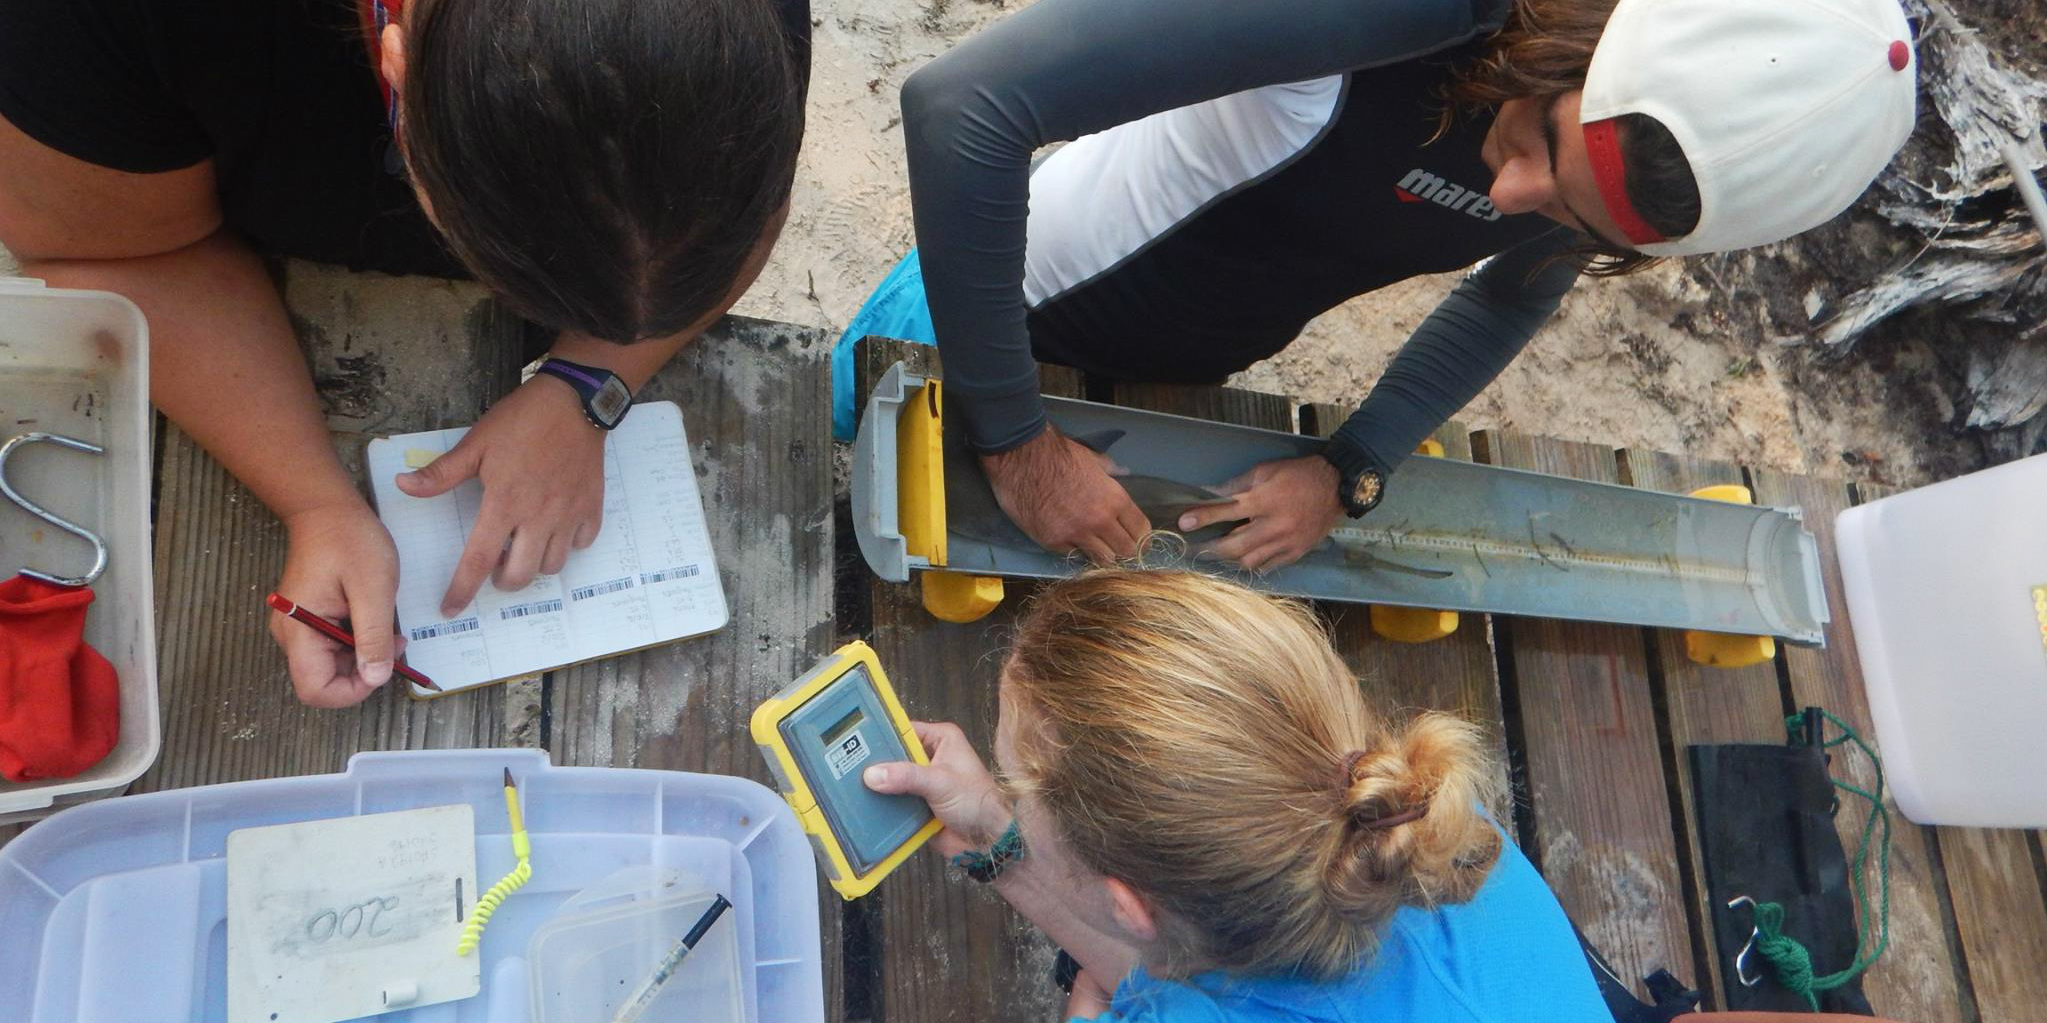 GVI participants collect data on the sicklefin lemon shark, which nests in the mangrove nurseries of Curieuse Island in Seychelles.